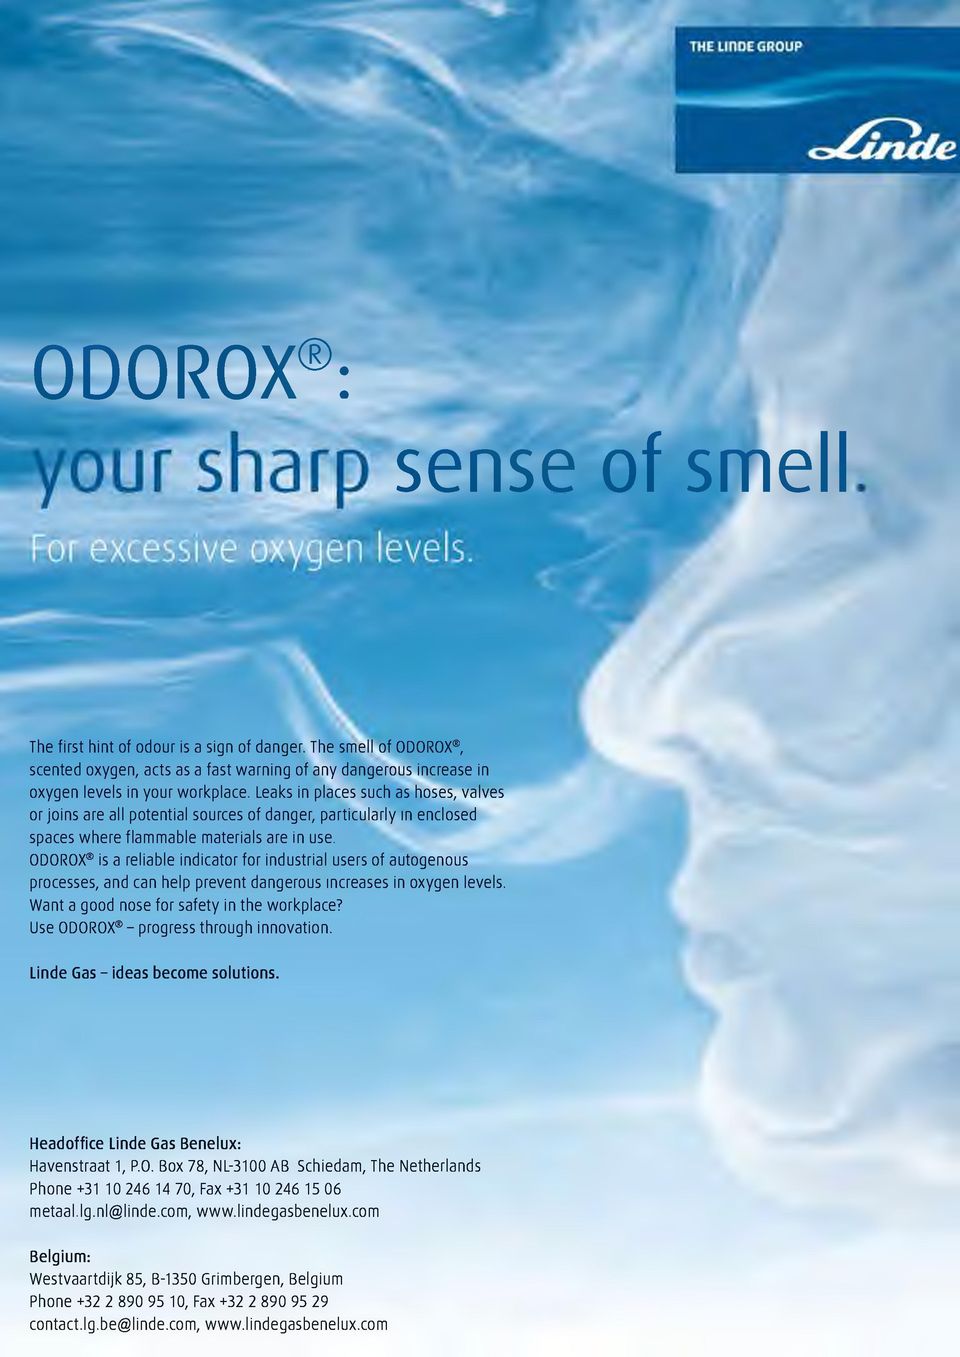 industrial users of autogenous processes, and can help prevent dangerous increases in oxygen levels. W ant a good nose for safety in the workplace? Use ODOROX - progress throu g h innovation.